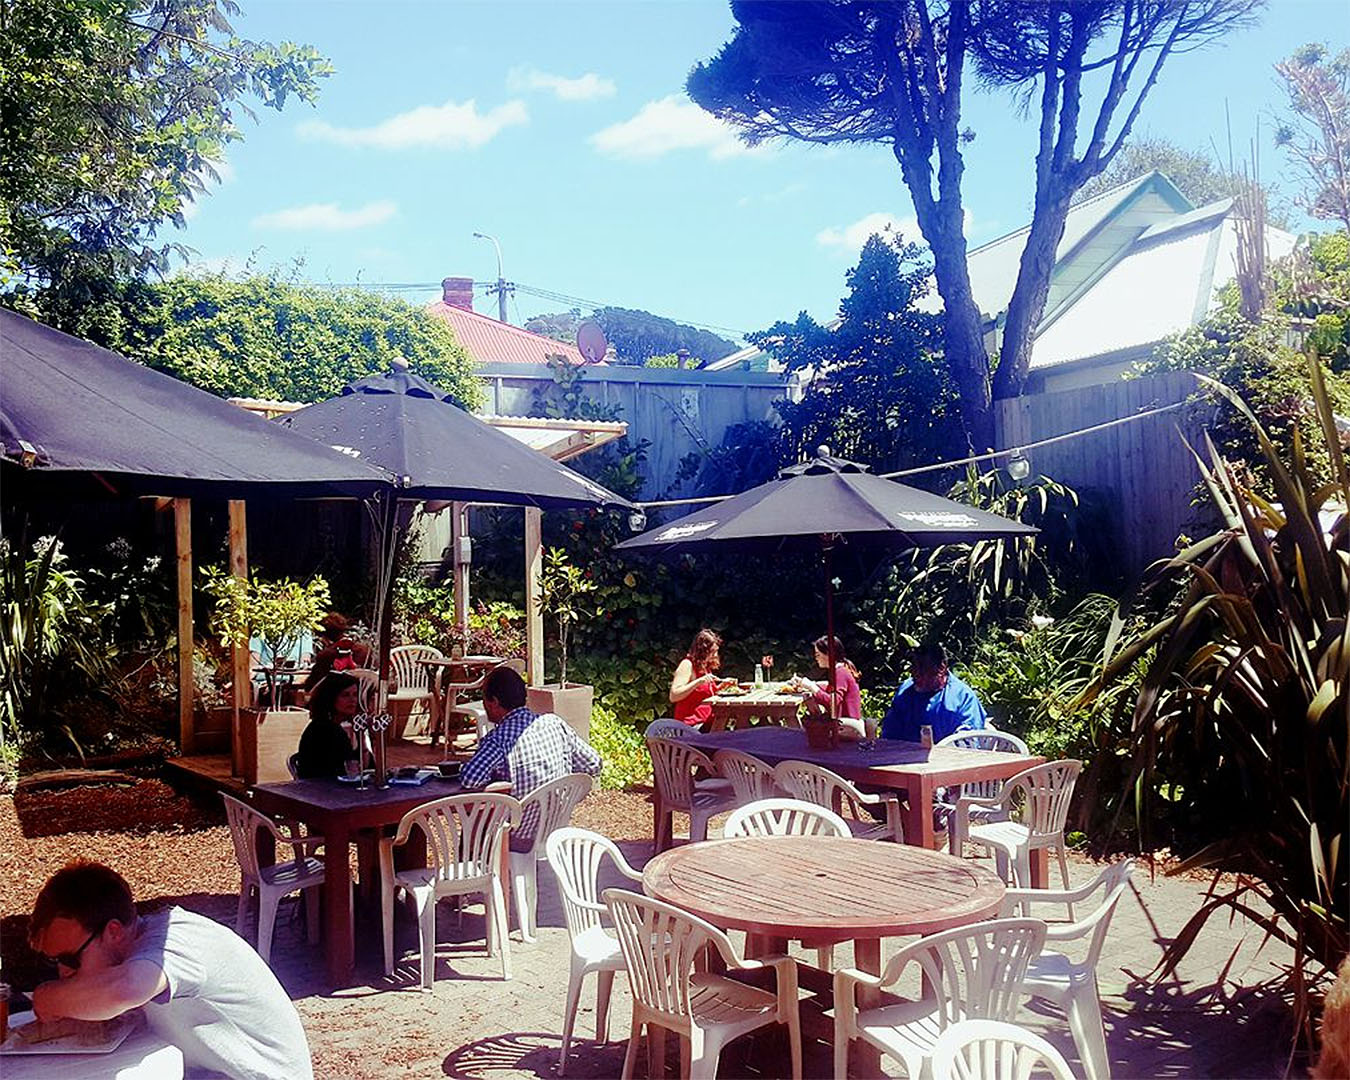 People relax in the outside garden at Baobab Cafe, one of the best breakfasts in Newtown, Wellington.